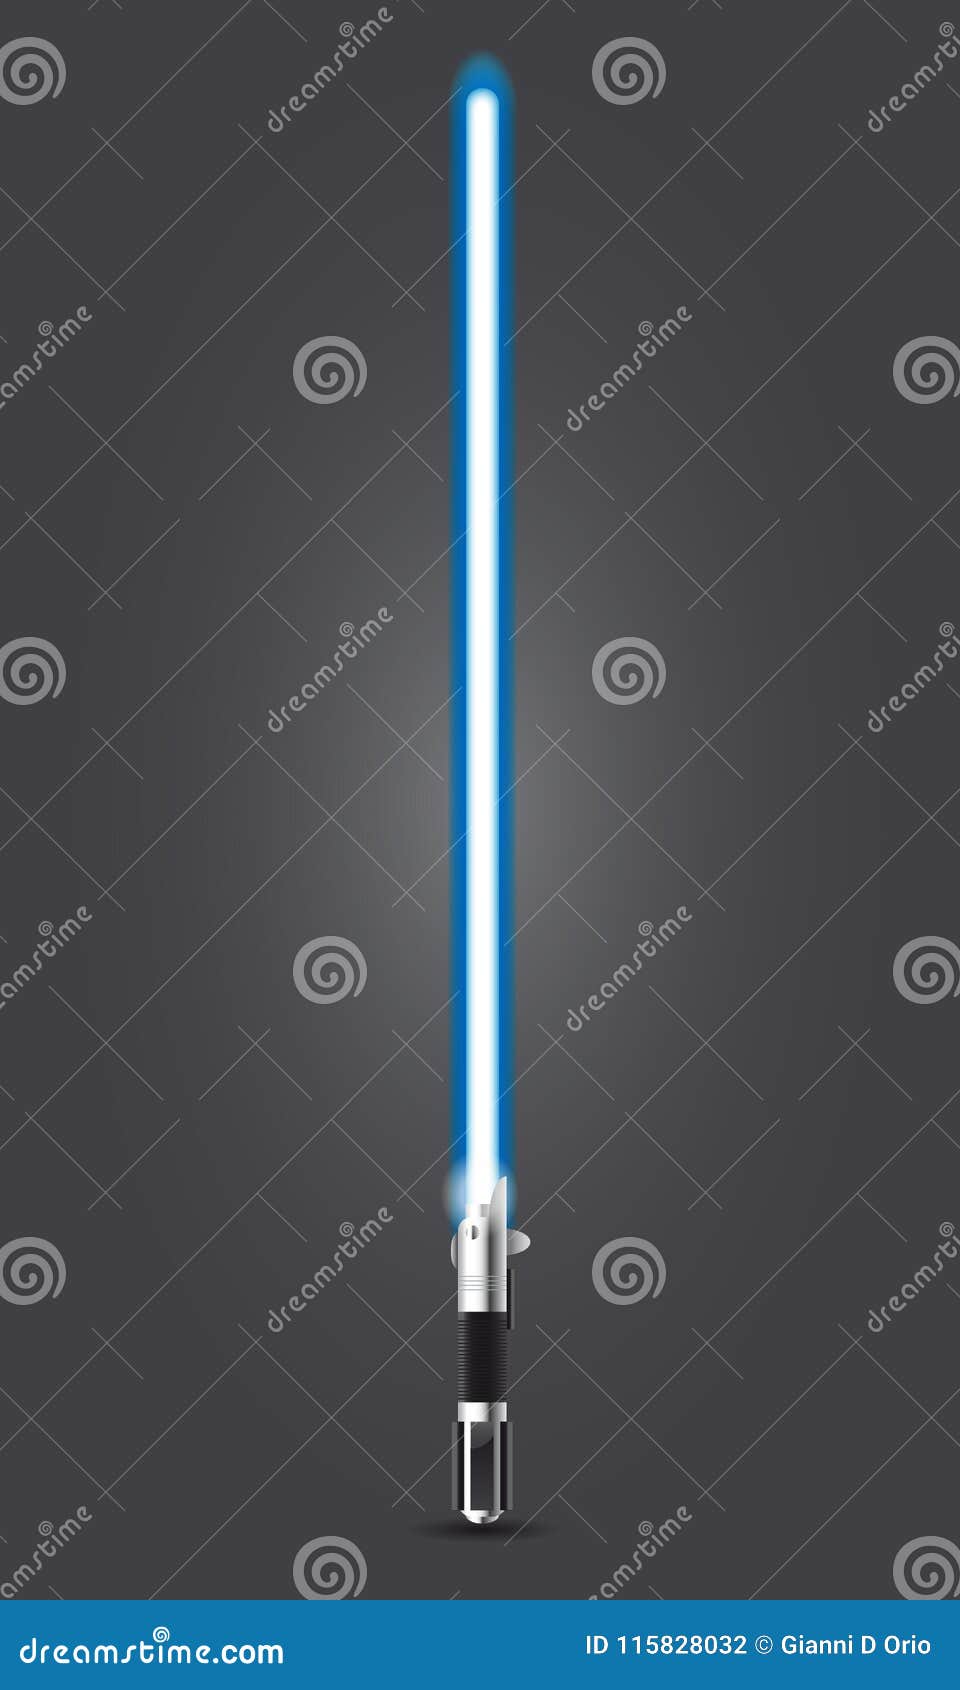 Star Wars The Return of the Jedi Lukes new lightsaber was originally  going to BLUE again but when th jedi lightsaber HD phone wallpaper   Pxfuel